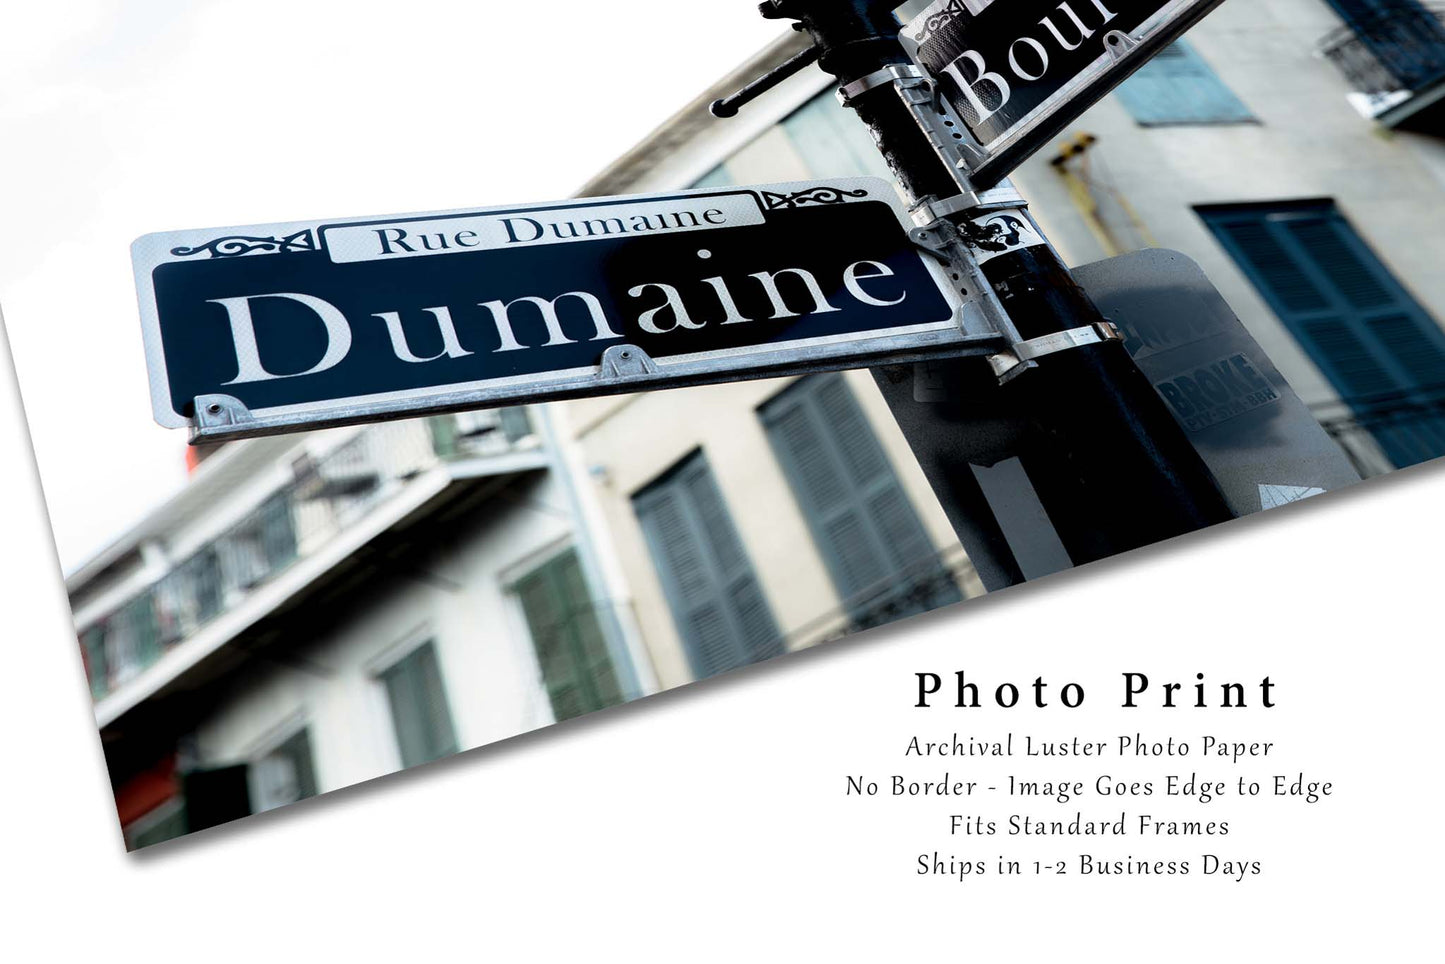 NOLA Photo Print | Dumaine and Bourbon Street Sign Picture I Louisiana Wall Art | New Orleans Photography | French Quarter Decor